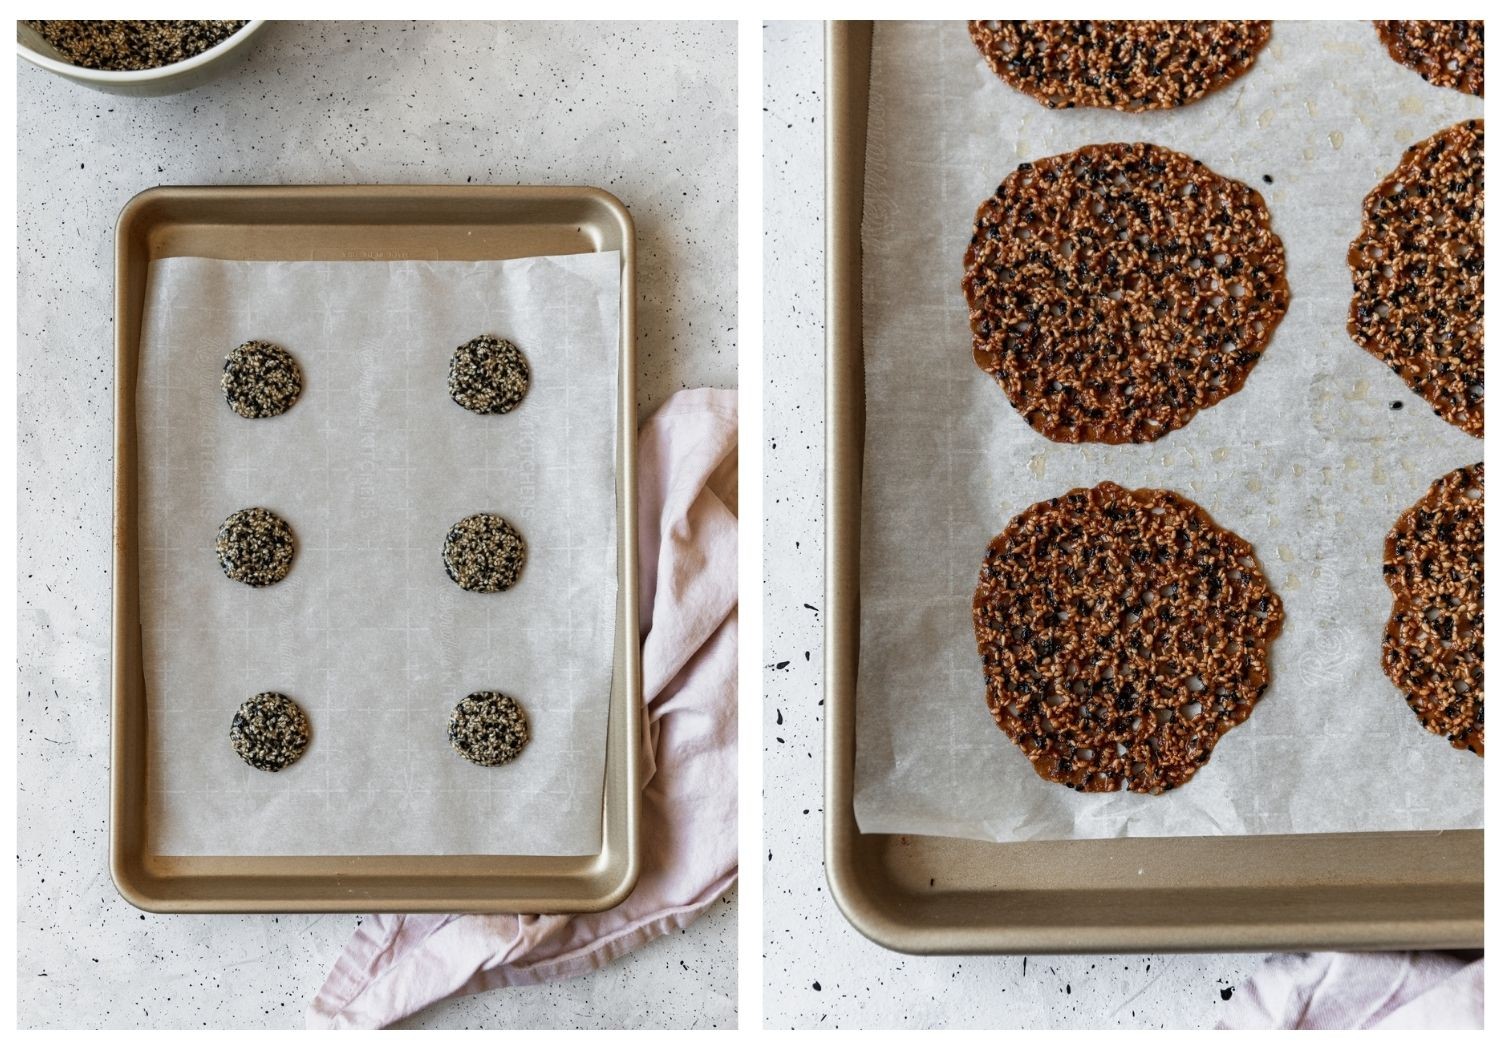 Two overhead images; on the left, a sheetpan is filled with balls of cookie dough. On the right is a closeup of baked Florentine cookies.